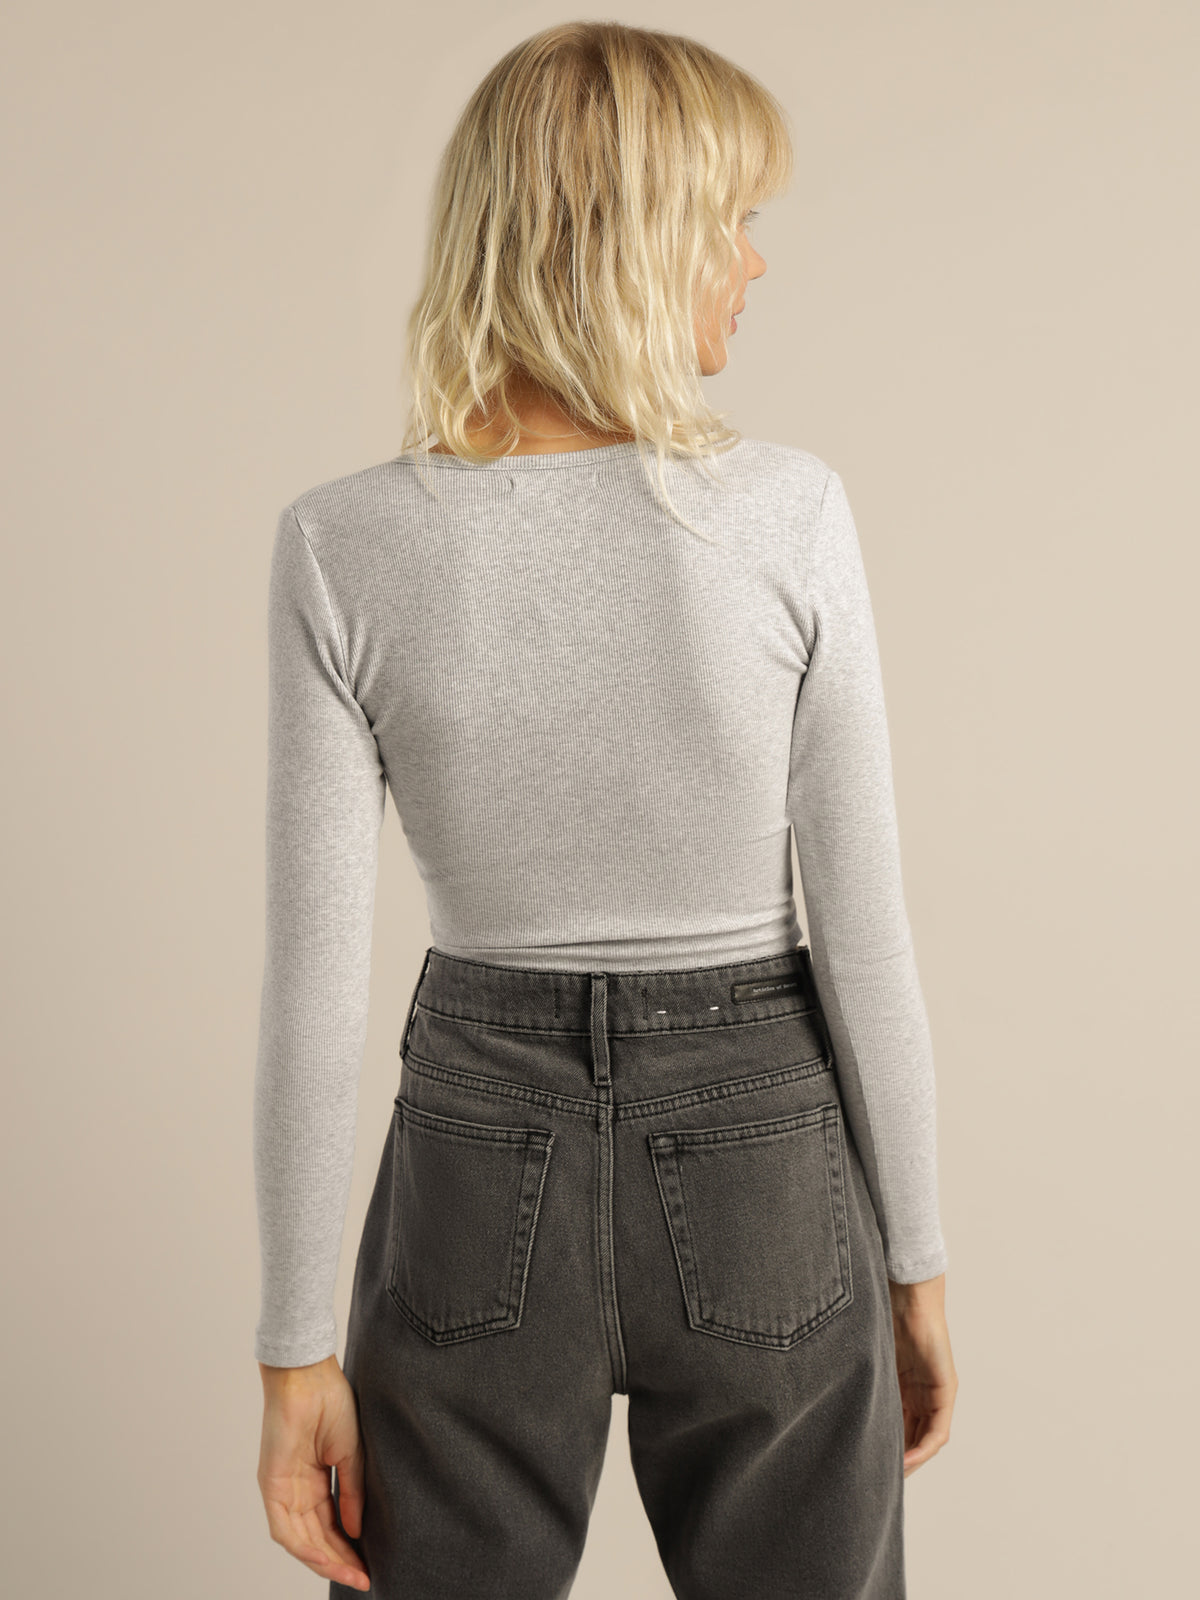 Tina Notch Front Long Sleeve Top in Grey Marle